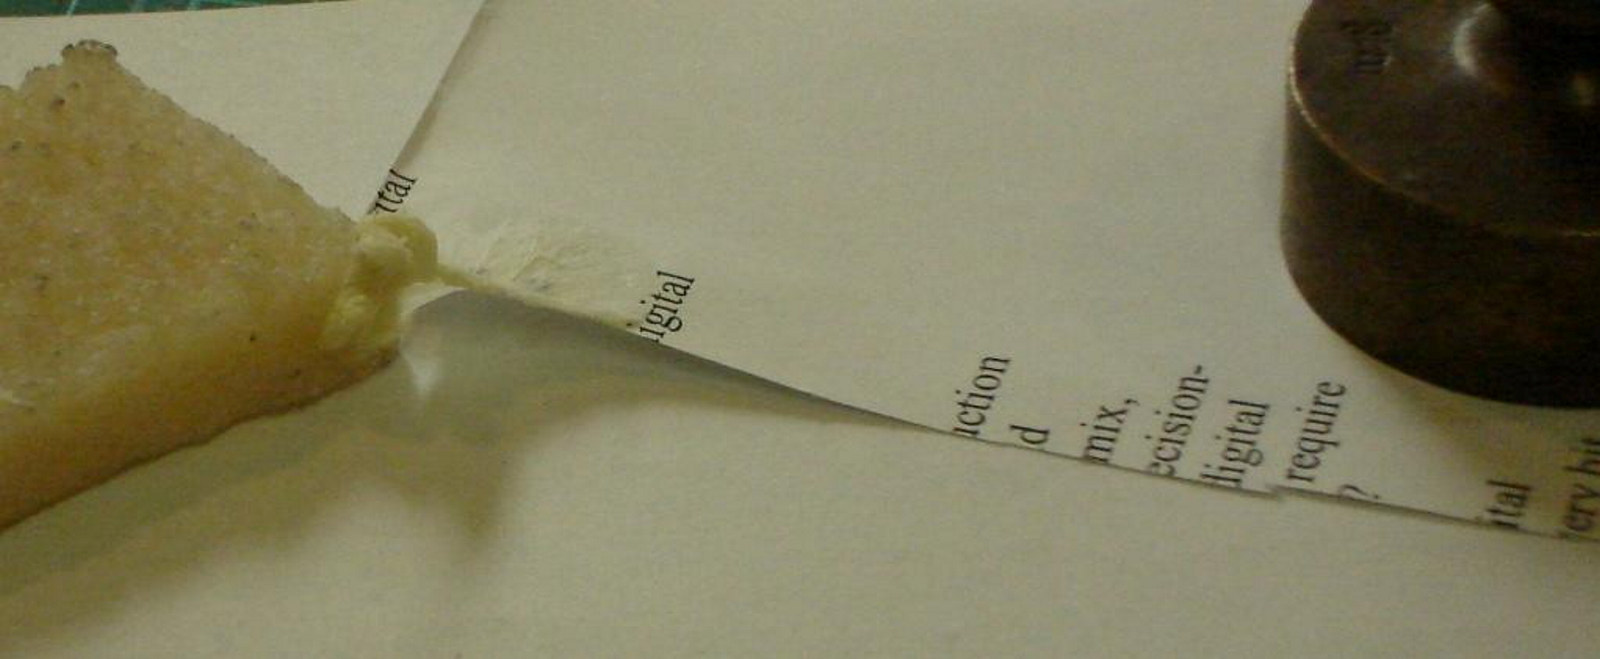 Chewing gum on paper - during treatment